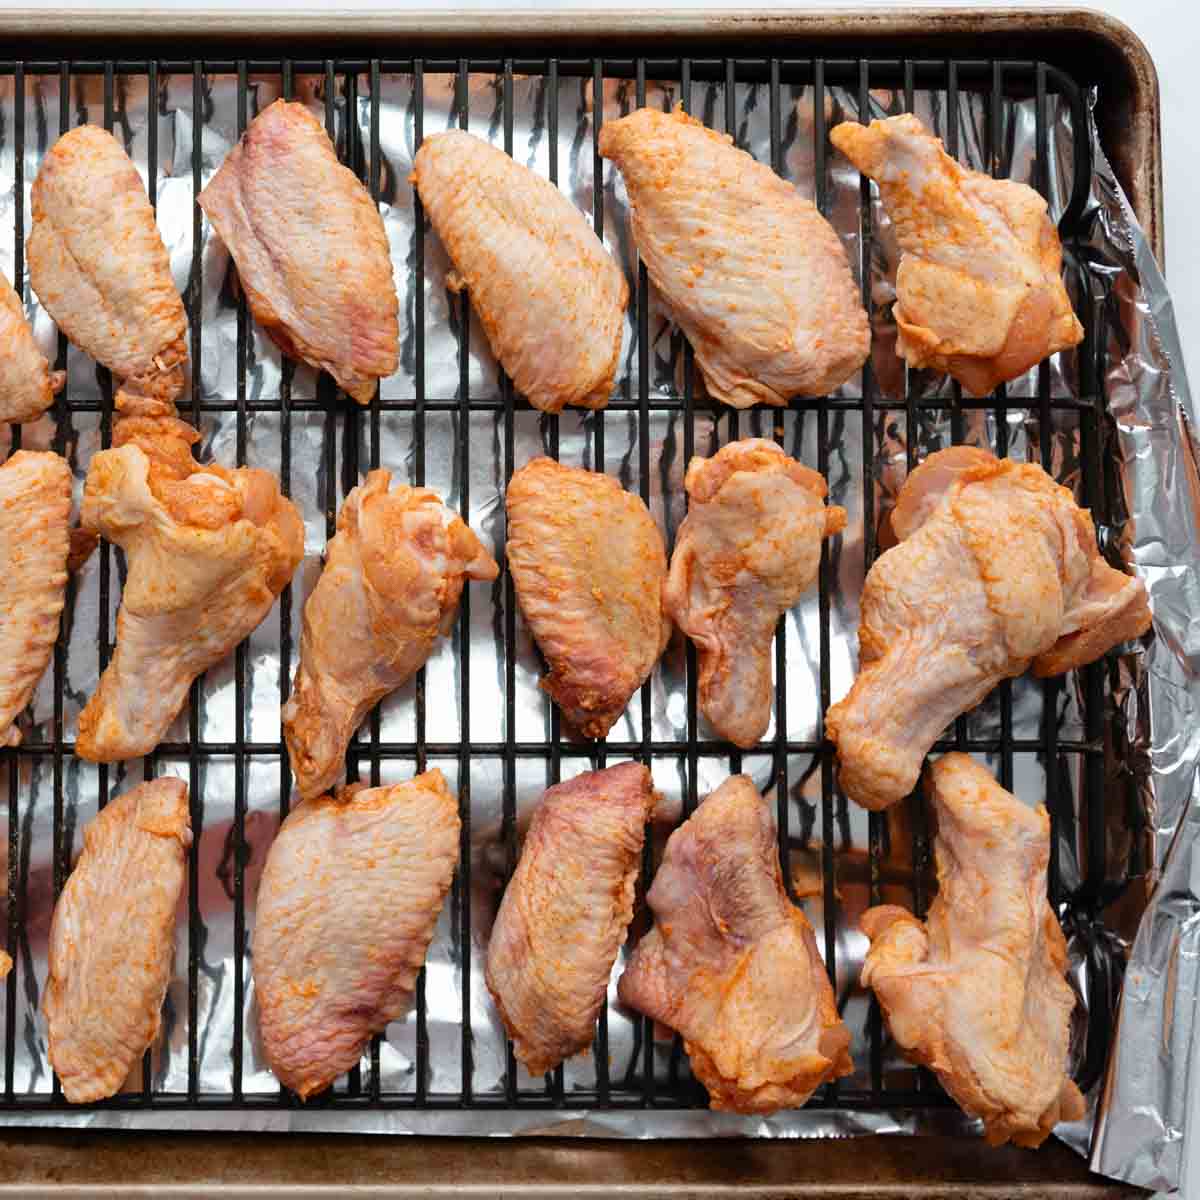 wings and drumettes arranged on a baking sheet.